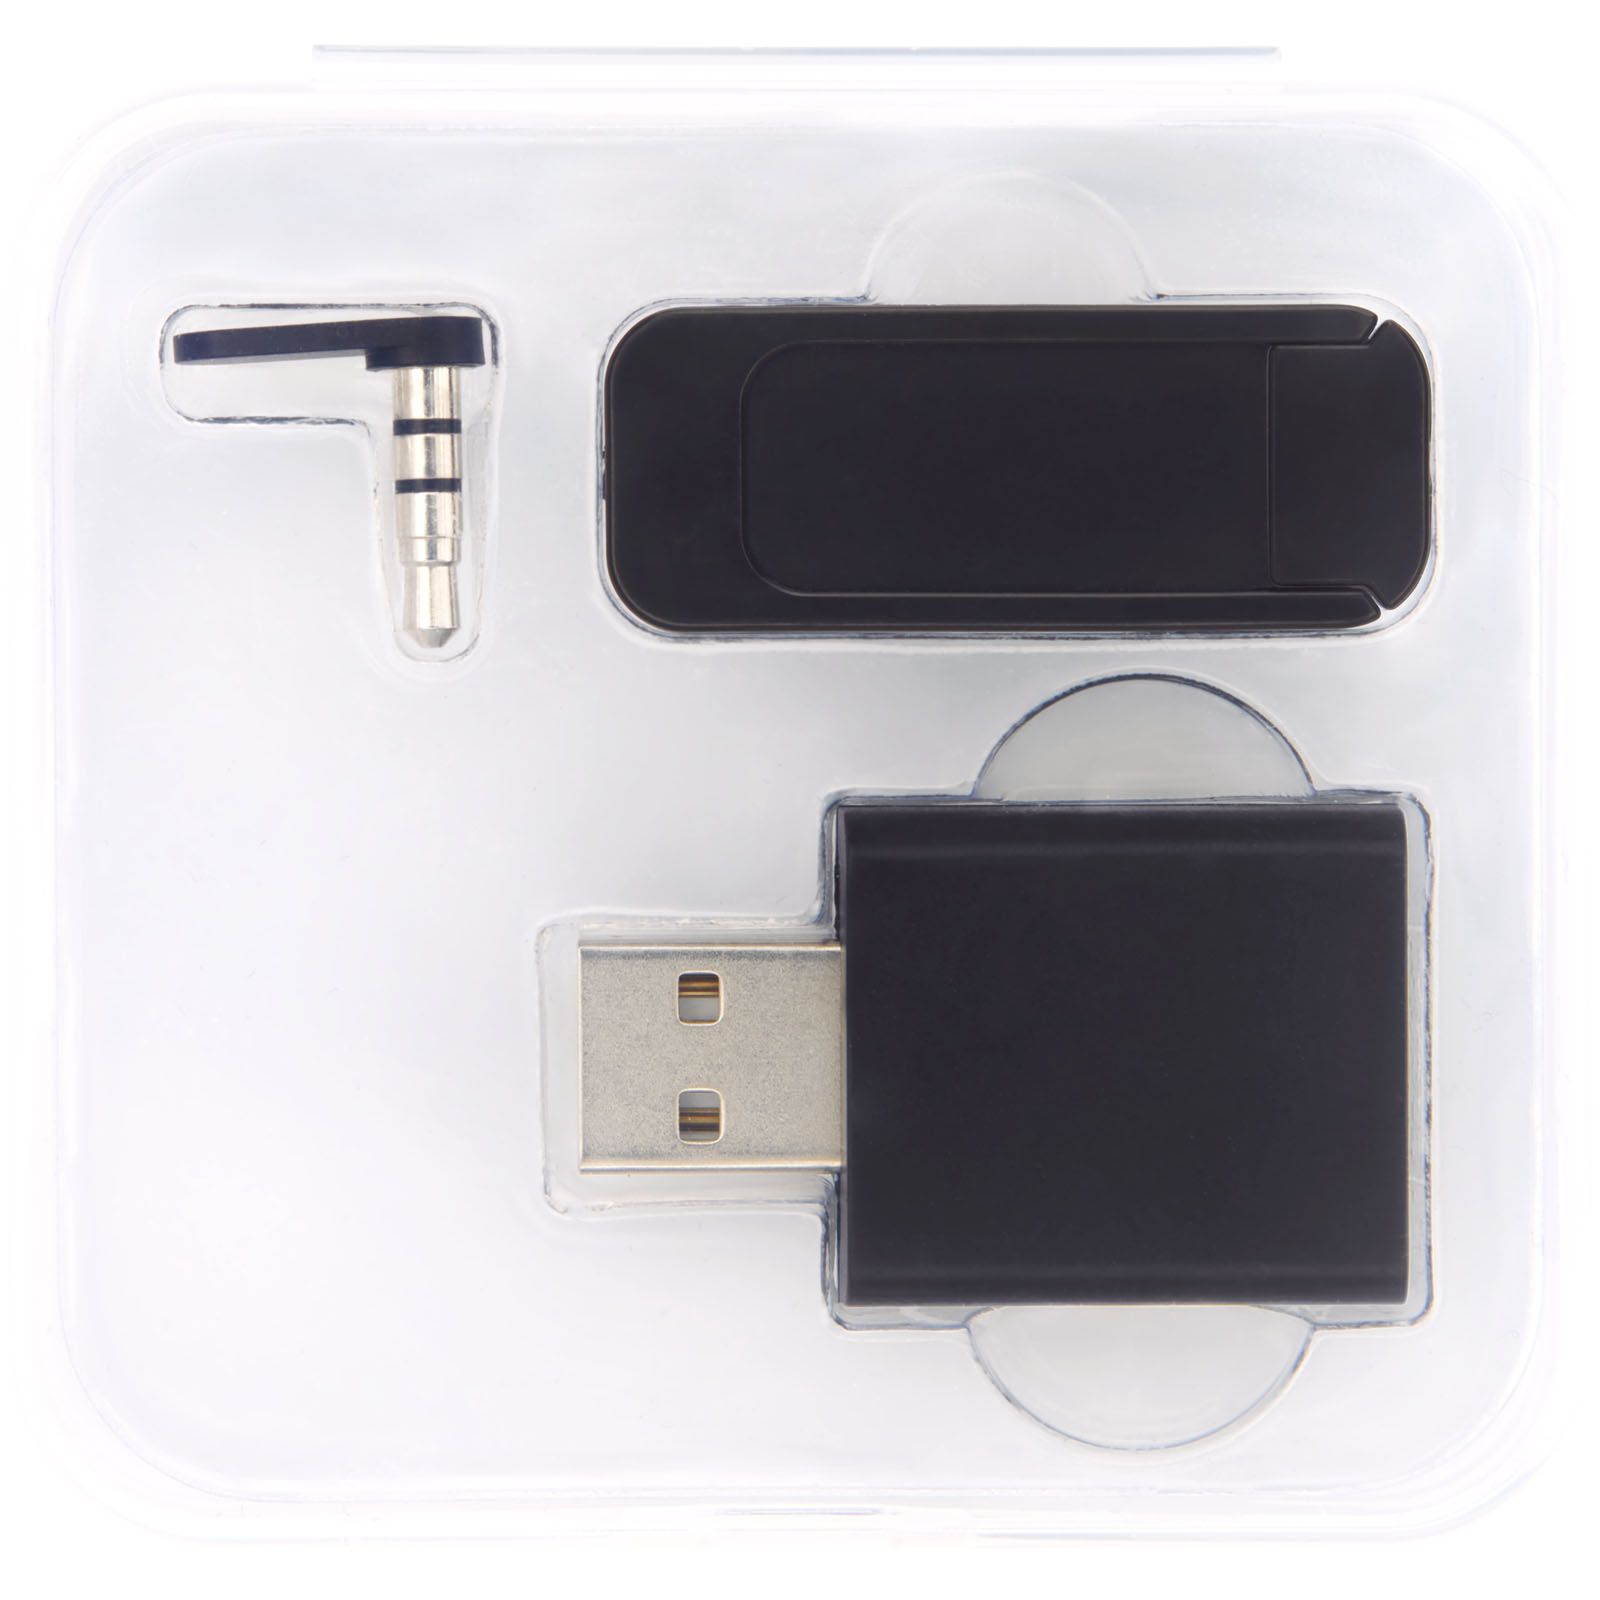 Advertising Computer Accessories - Incognito privacy kit - 1